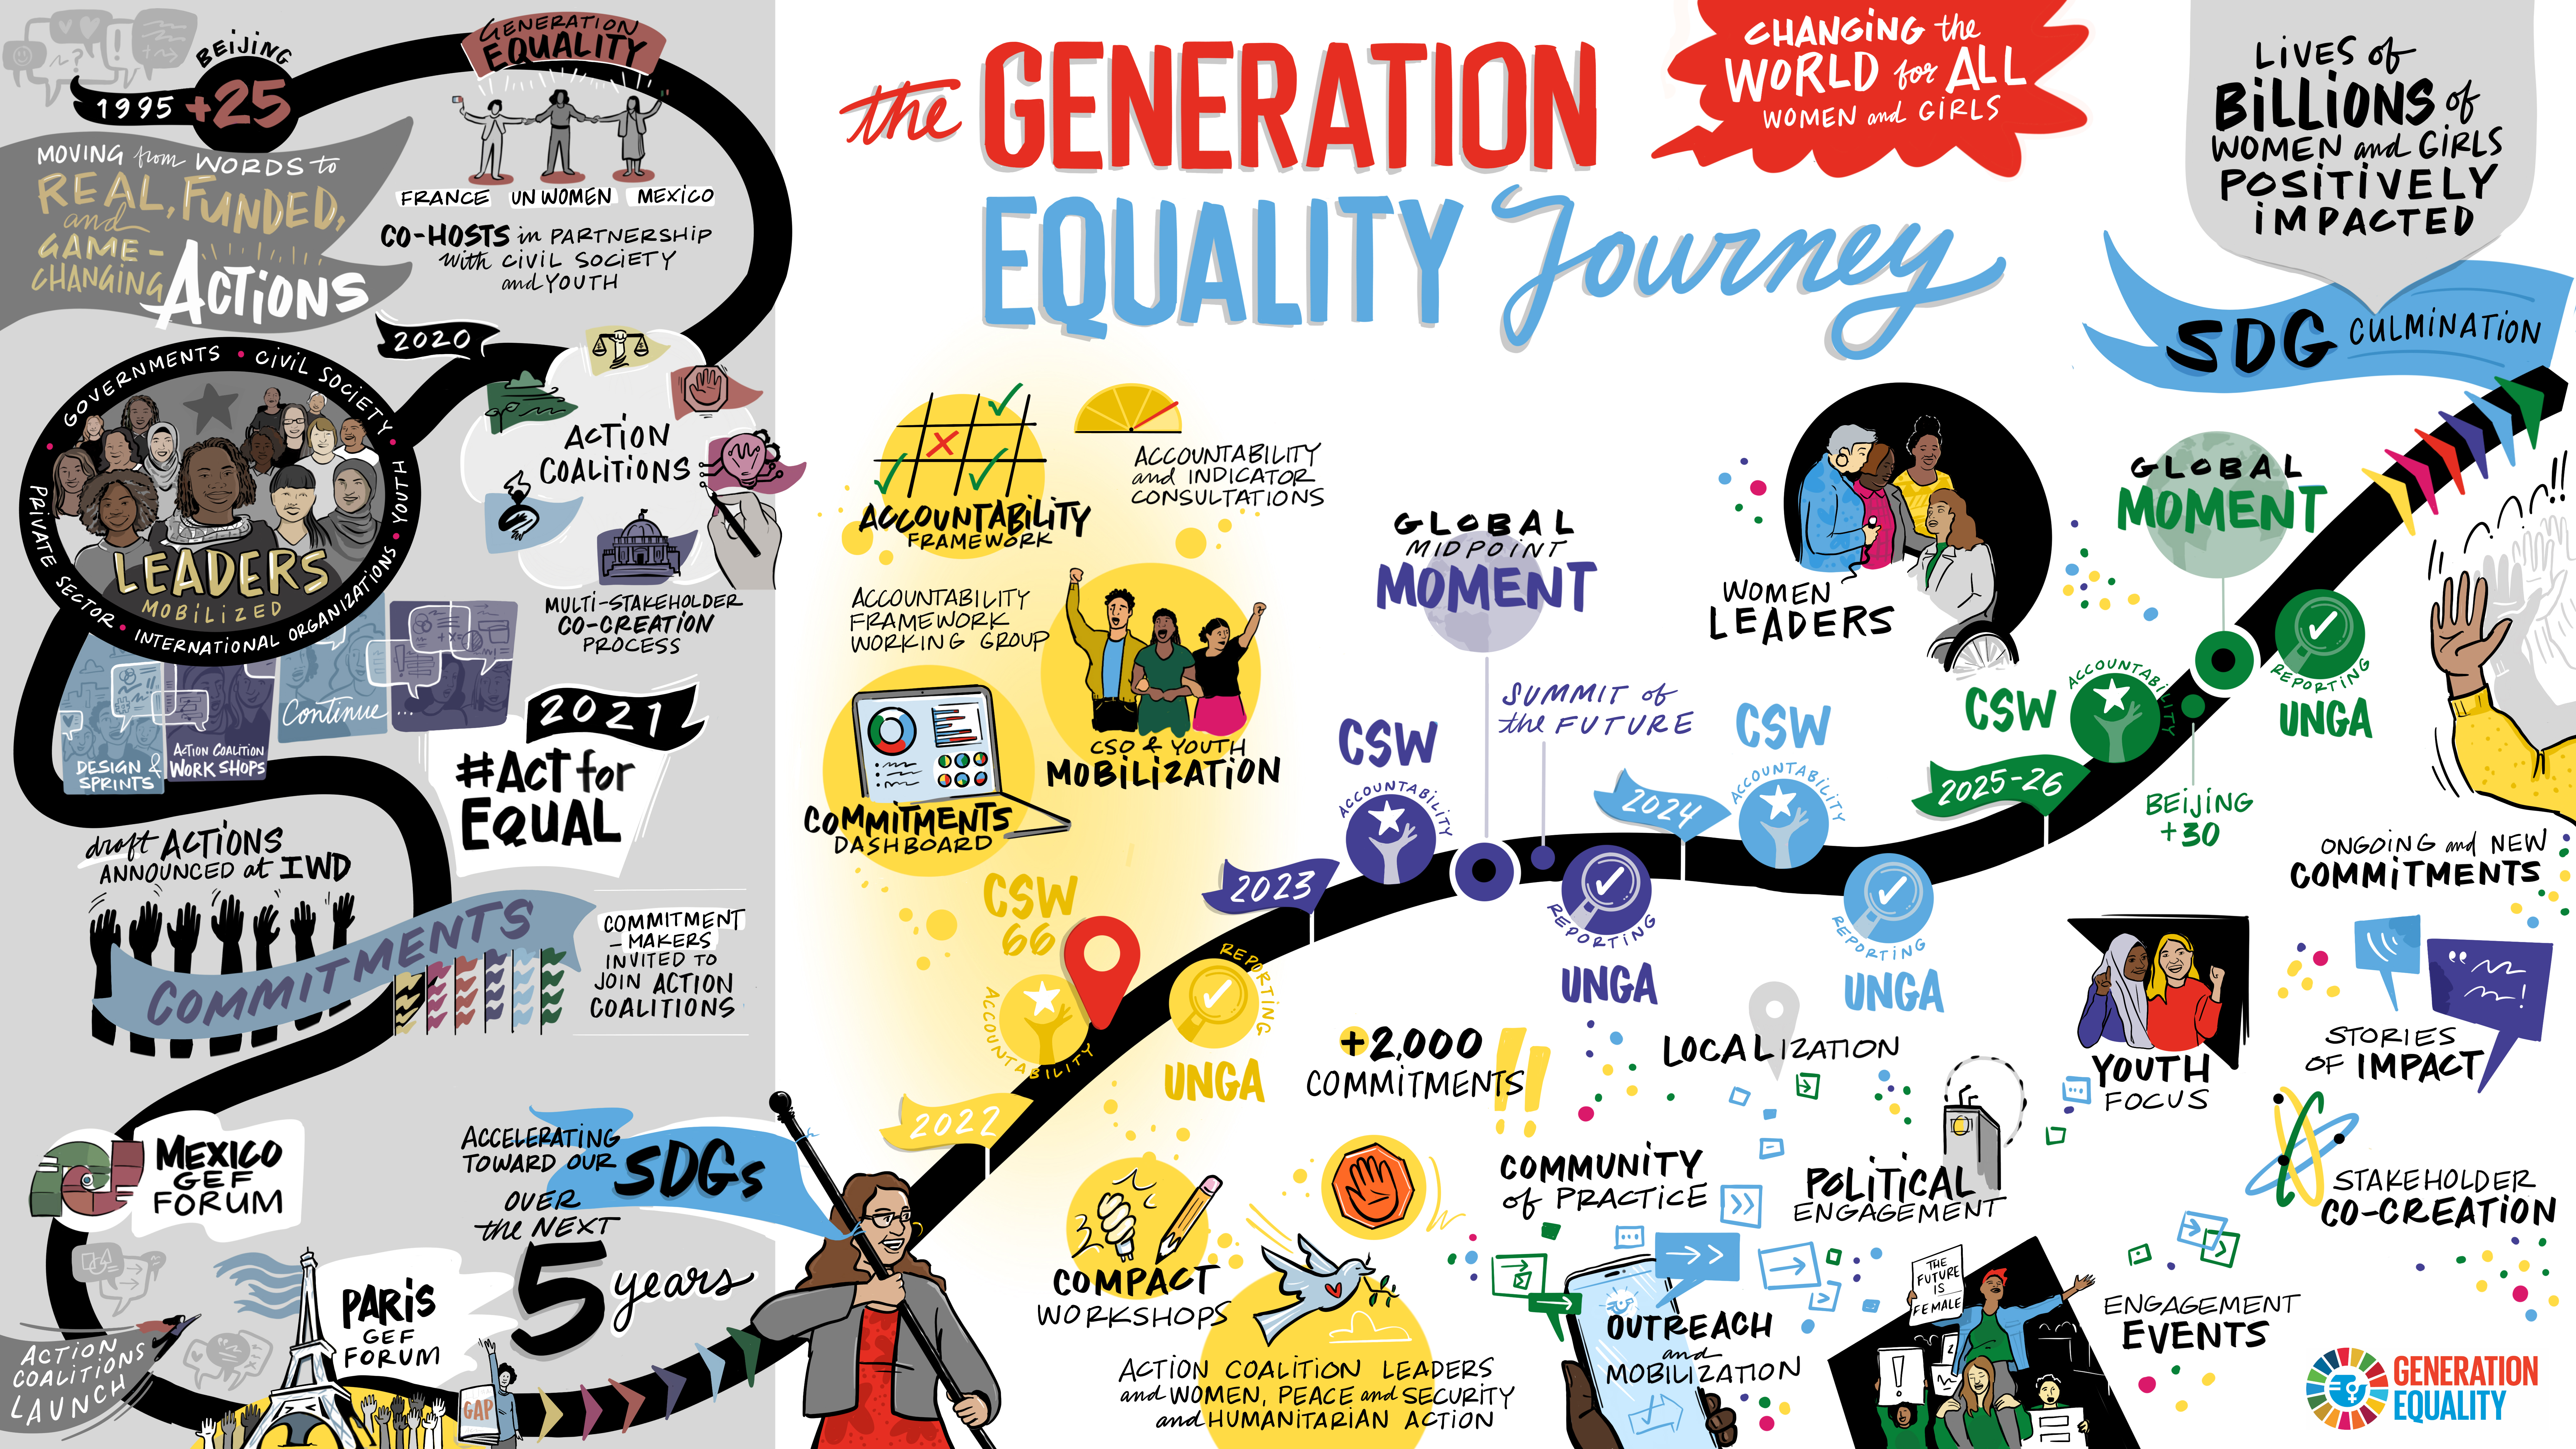 A visual representation of the journey ahead for Generation Equality produced by theDifference, outlining the exciting moments and impactful work that lies ahead.